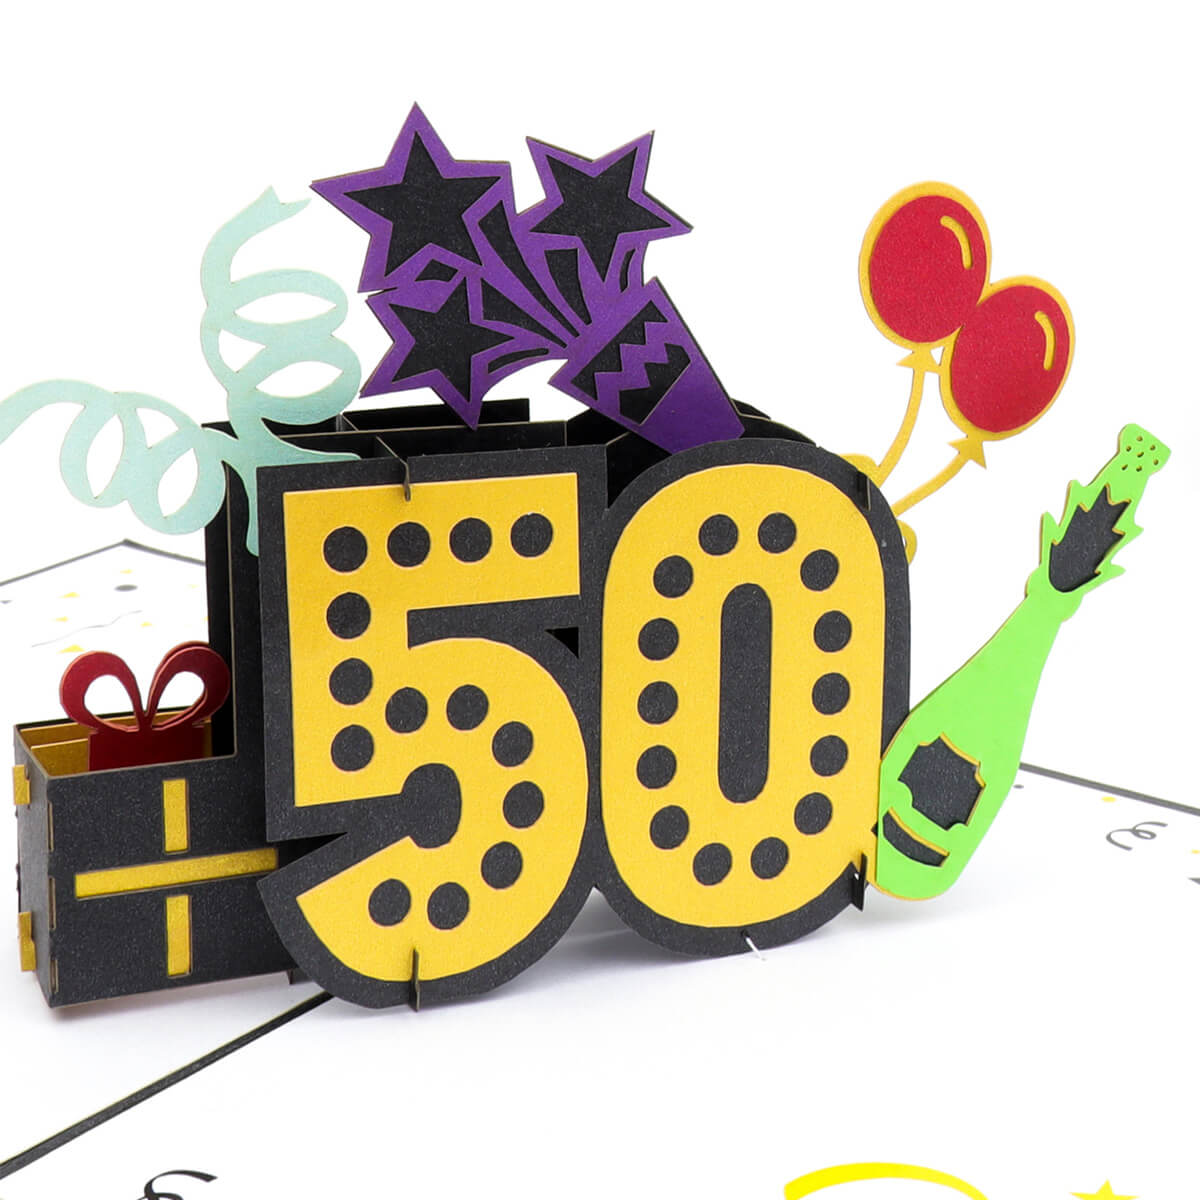 Close up image of 50th birthday pop up card